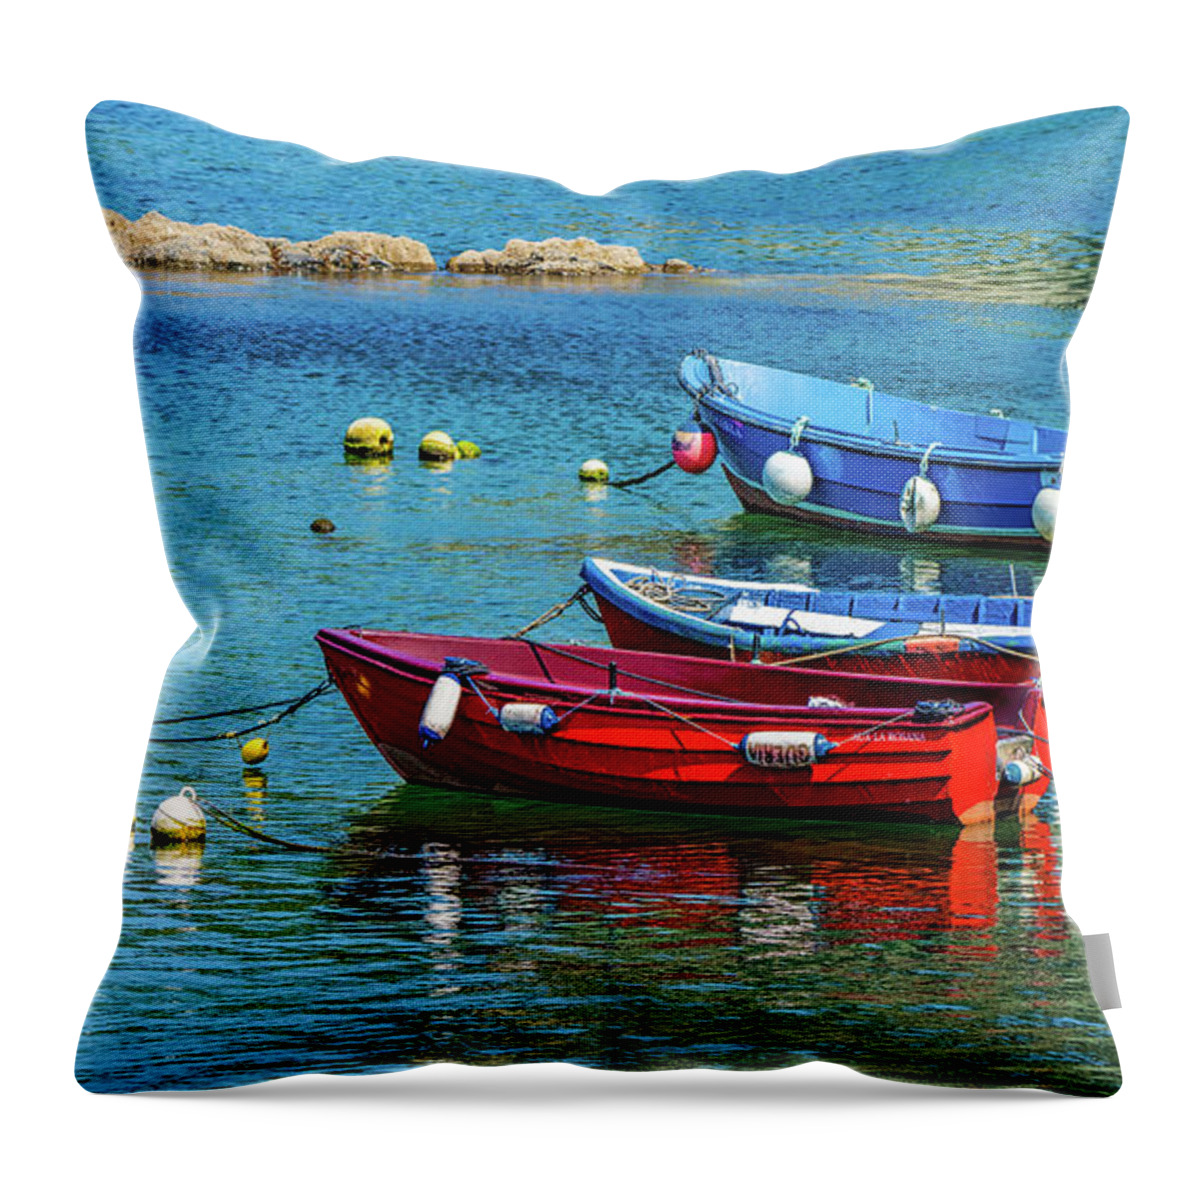 Fishing Boats Throw Pillow featuring the photograph Cudillero Boats by Chris Lord